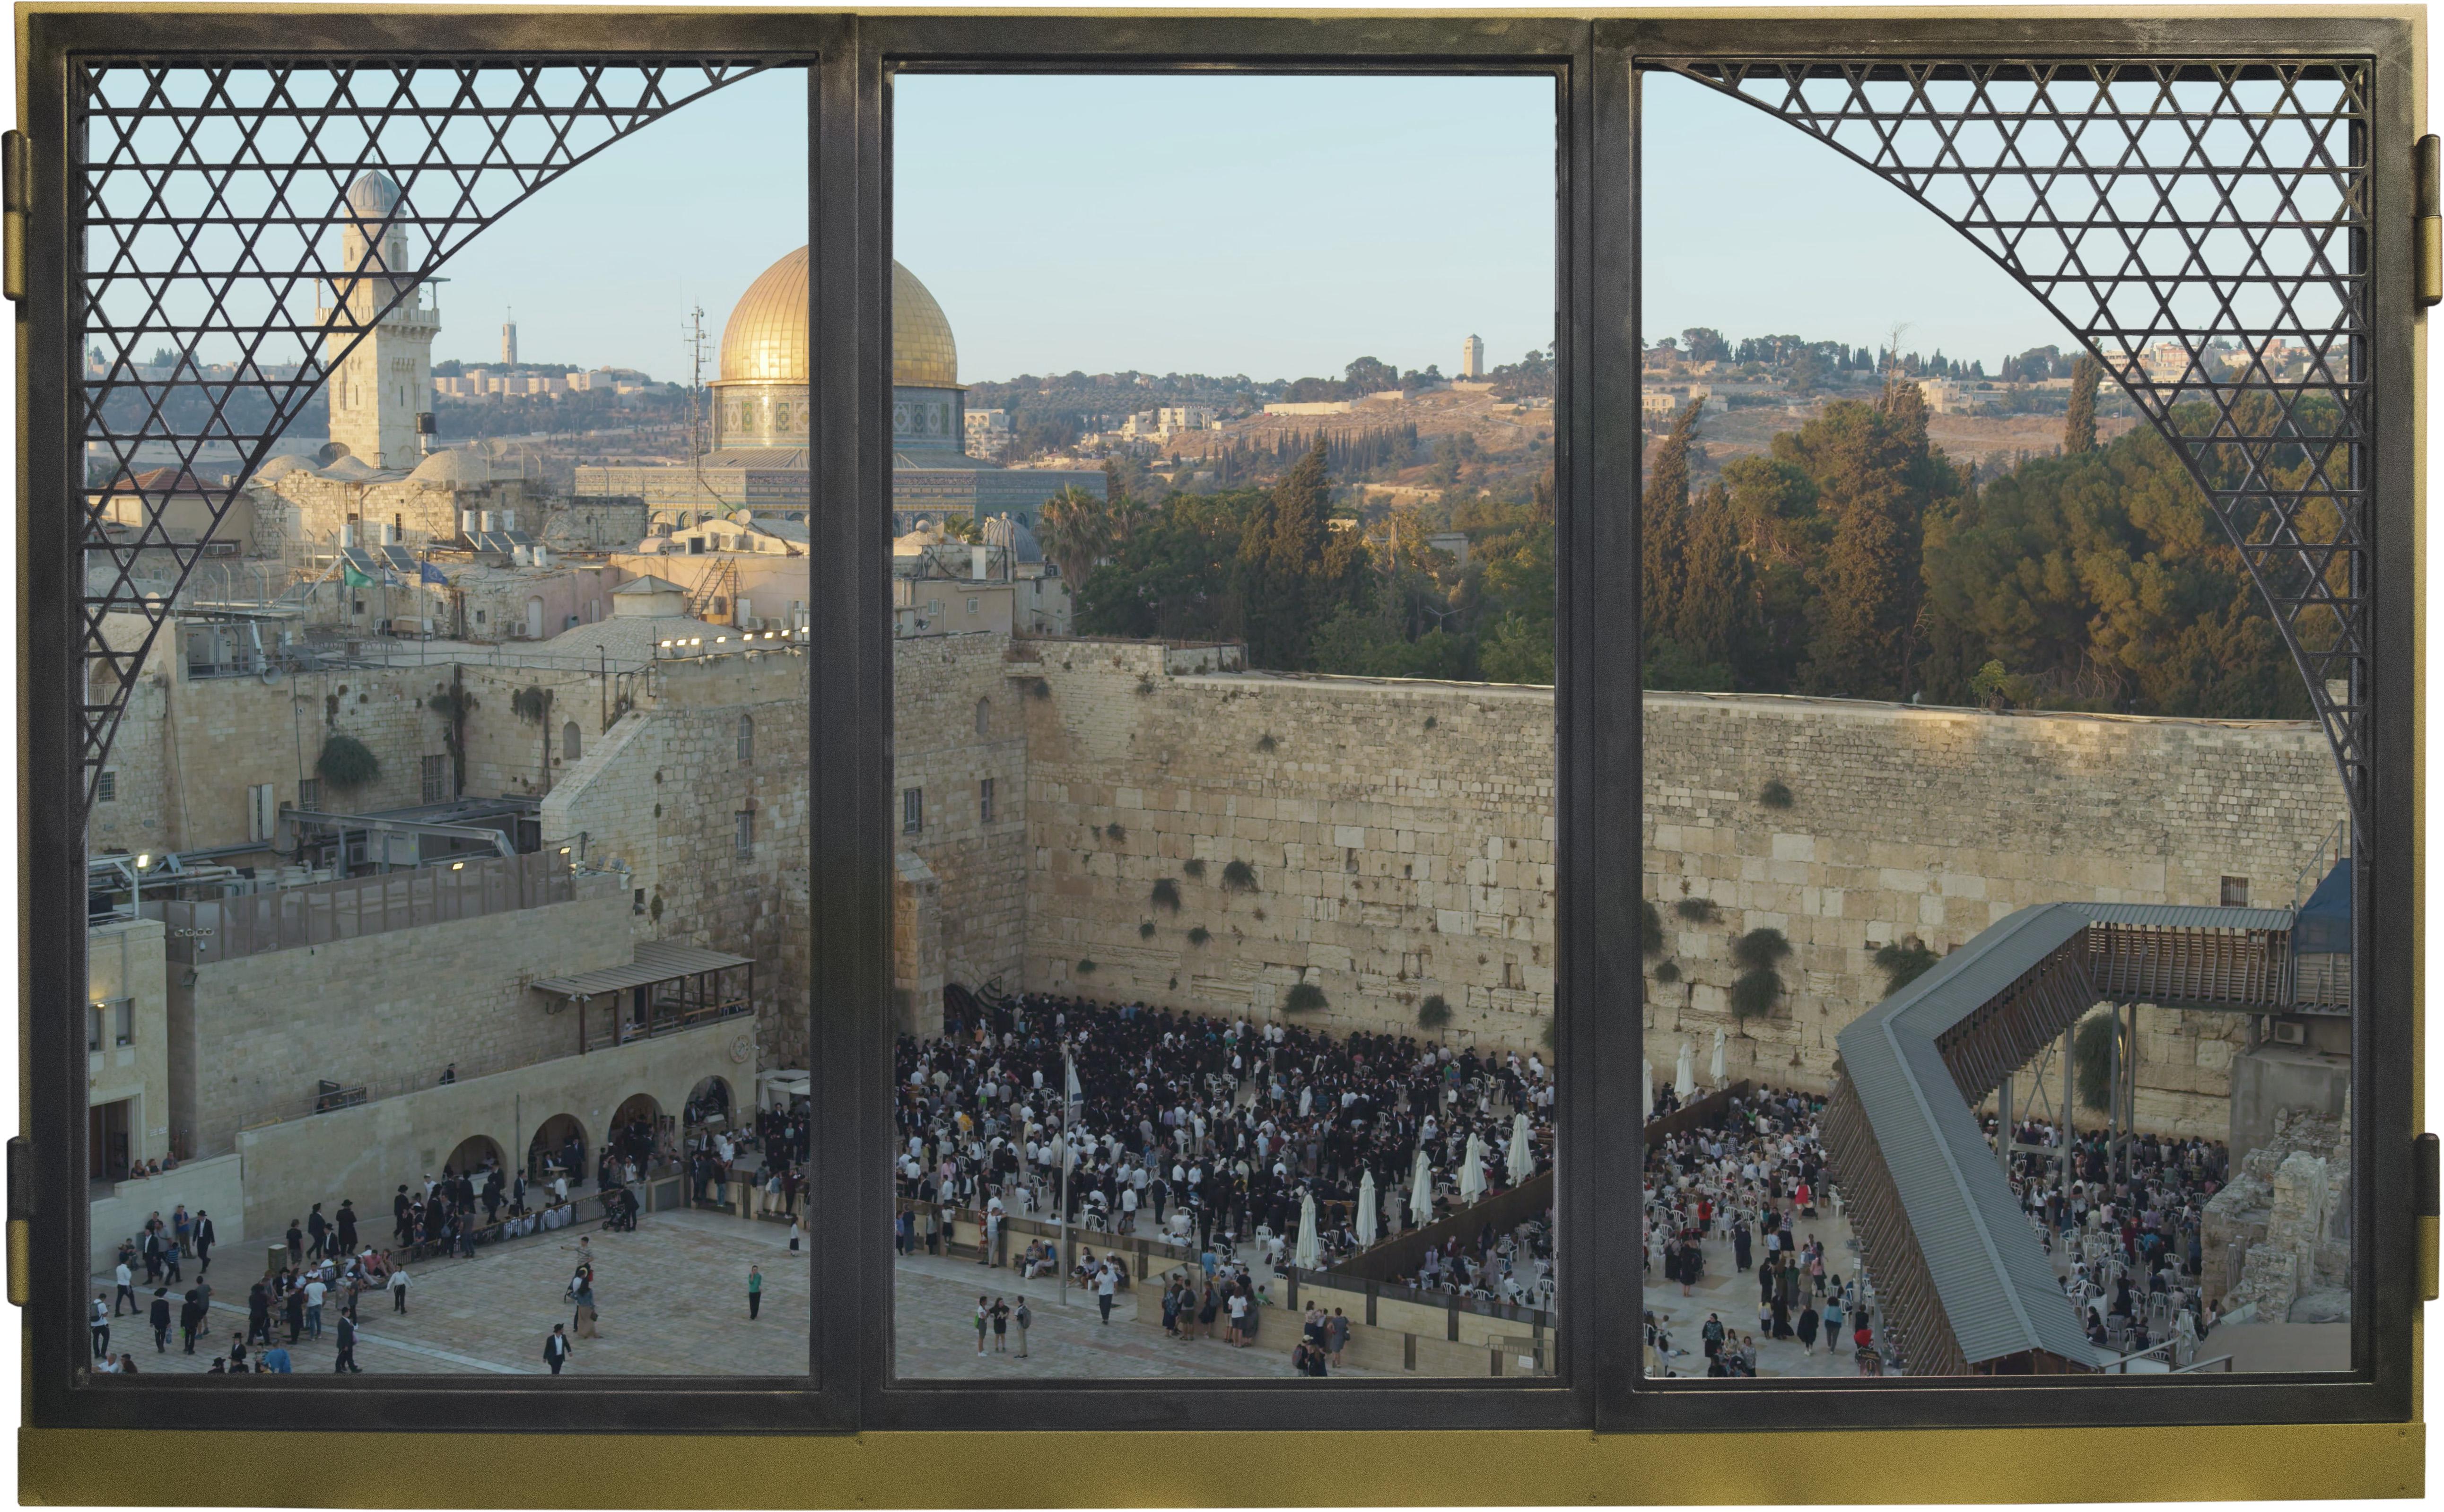 Glass Anotherview N.18 A Sunday by the Western Wall, Video Art by Anotherview For Sale